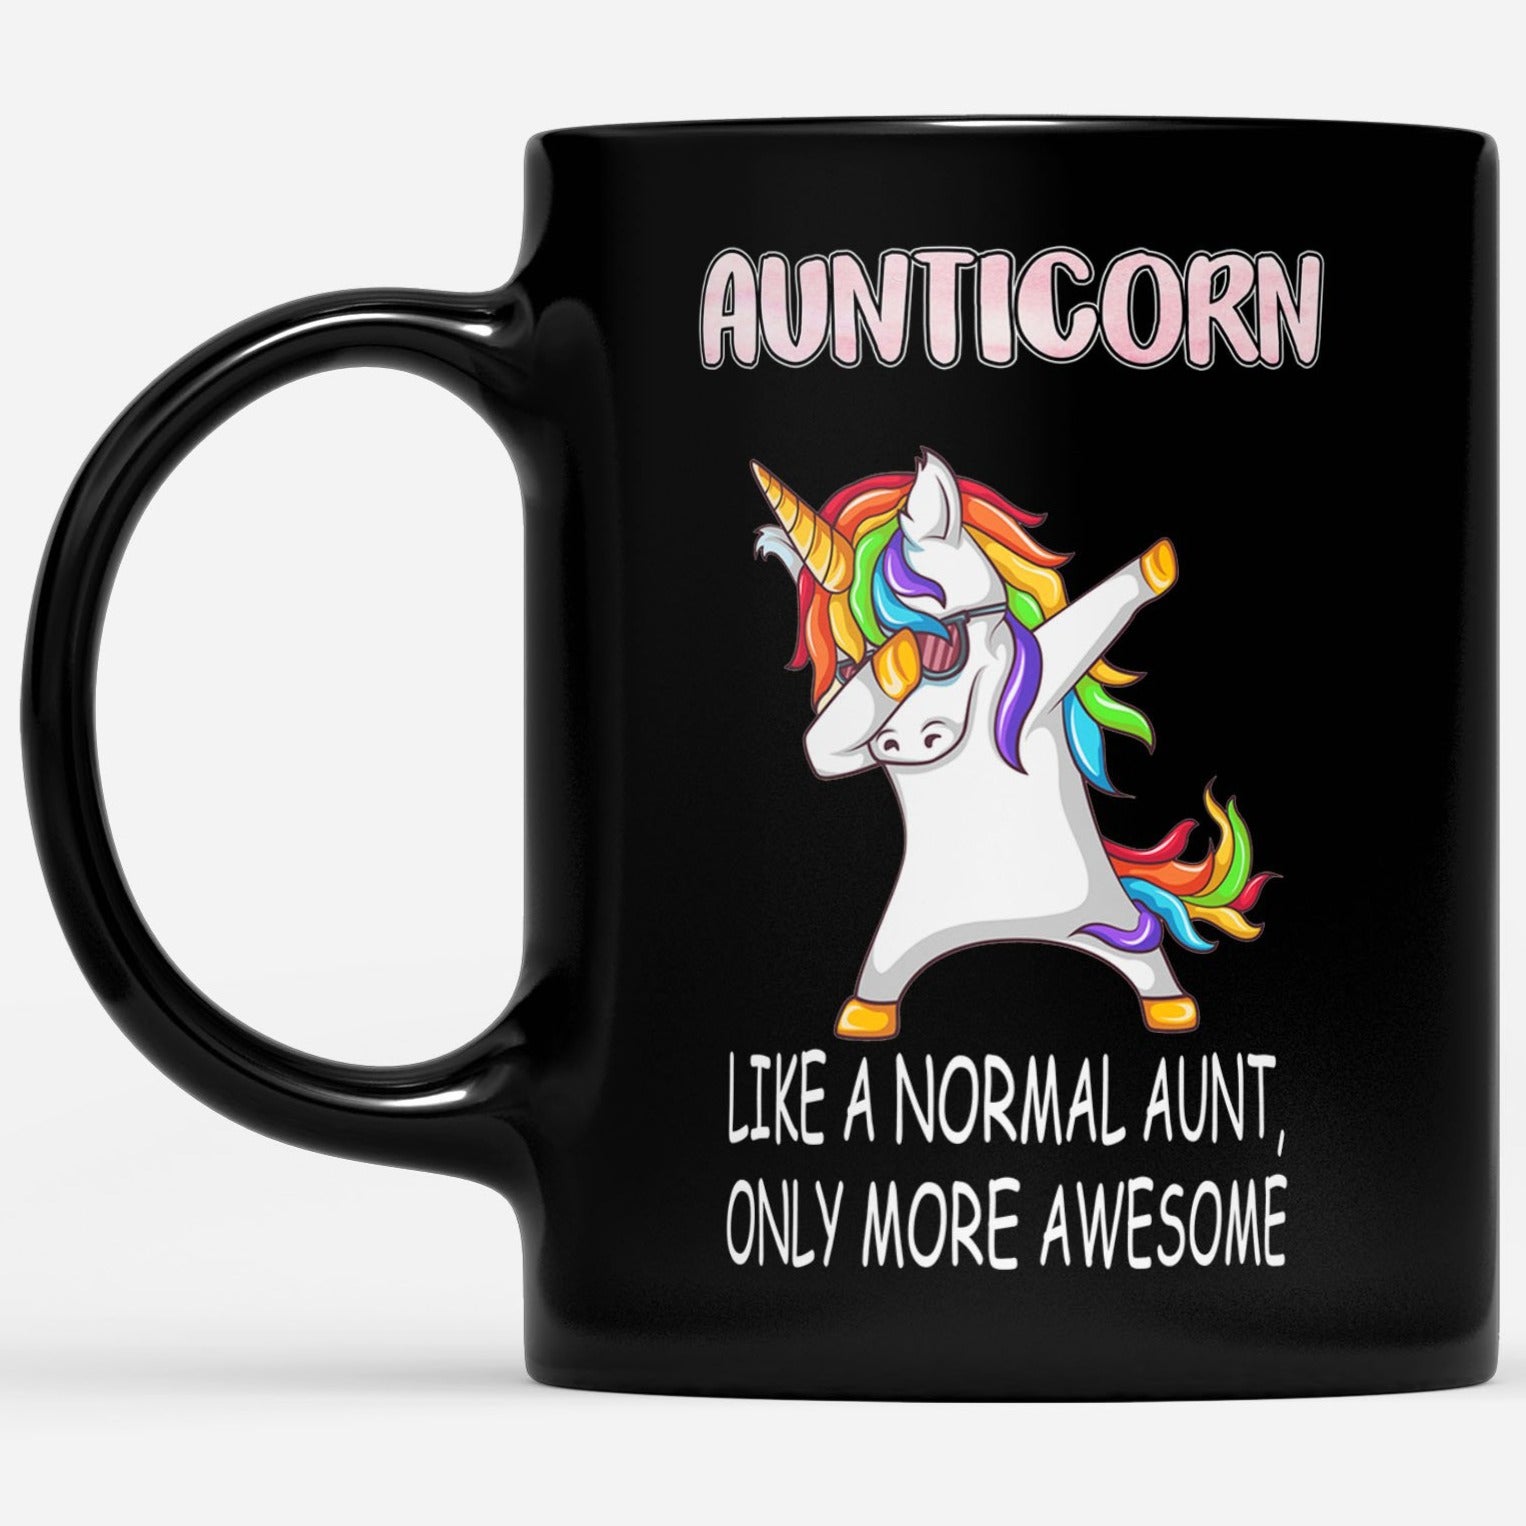 Aunticorn Like A Normal Aunt only More Awesome Gift Ideas For Aunt And Women W DS Black Mug